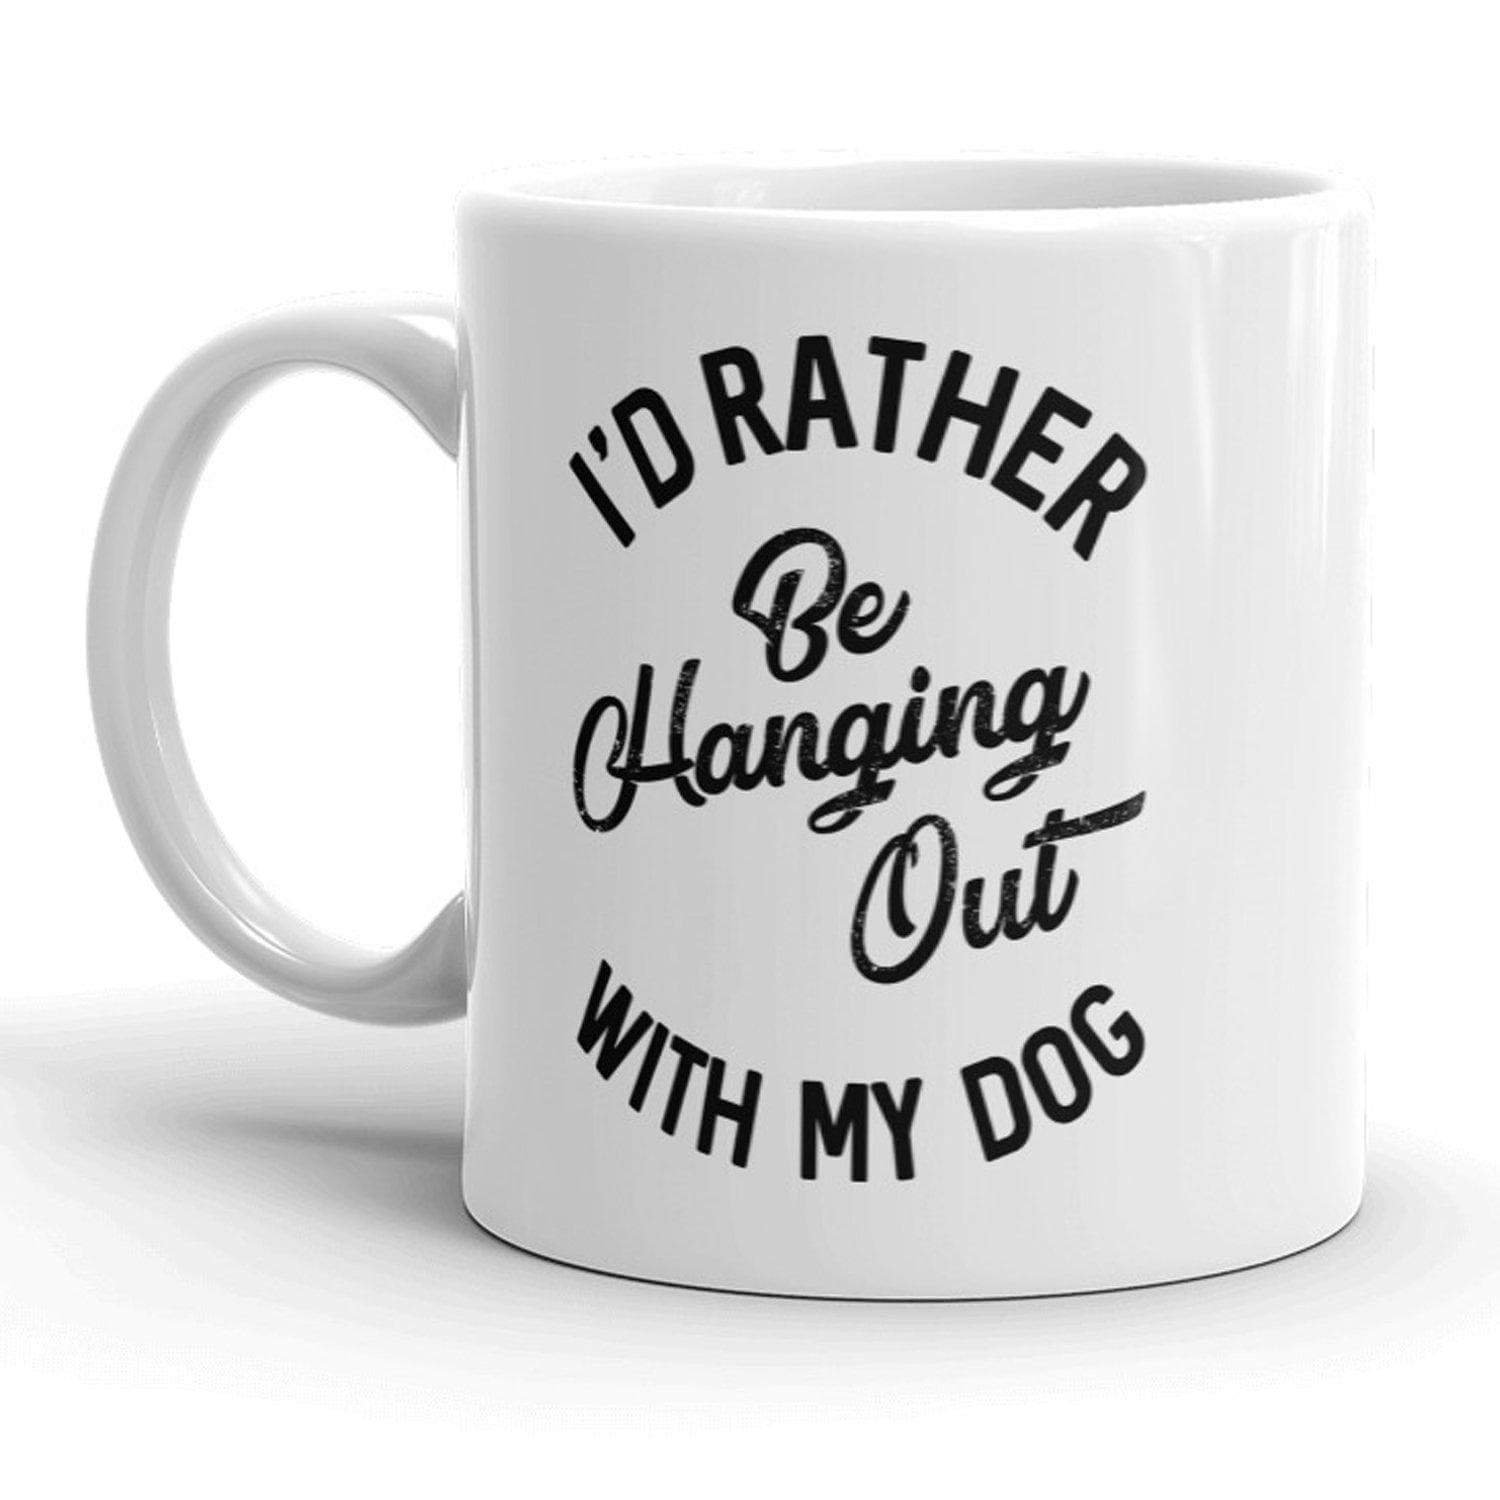 I'd Rather Be Hanging Out With My Dog Mug - Crazy Dog T-Shirts